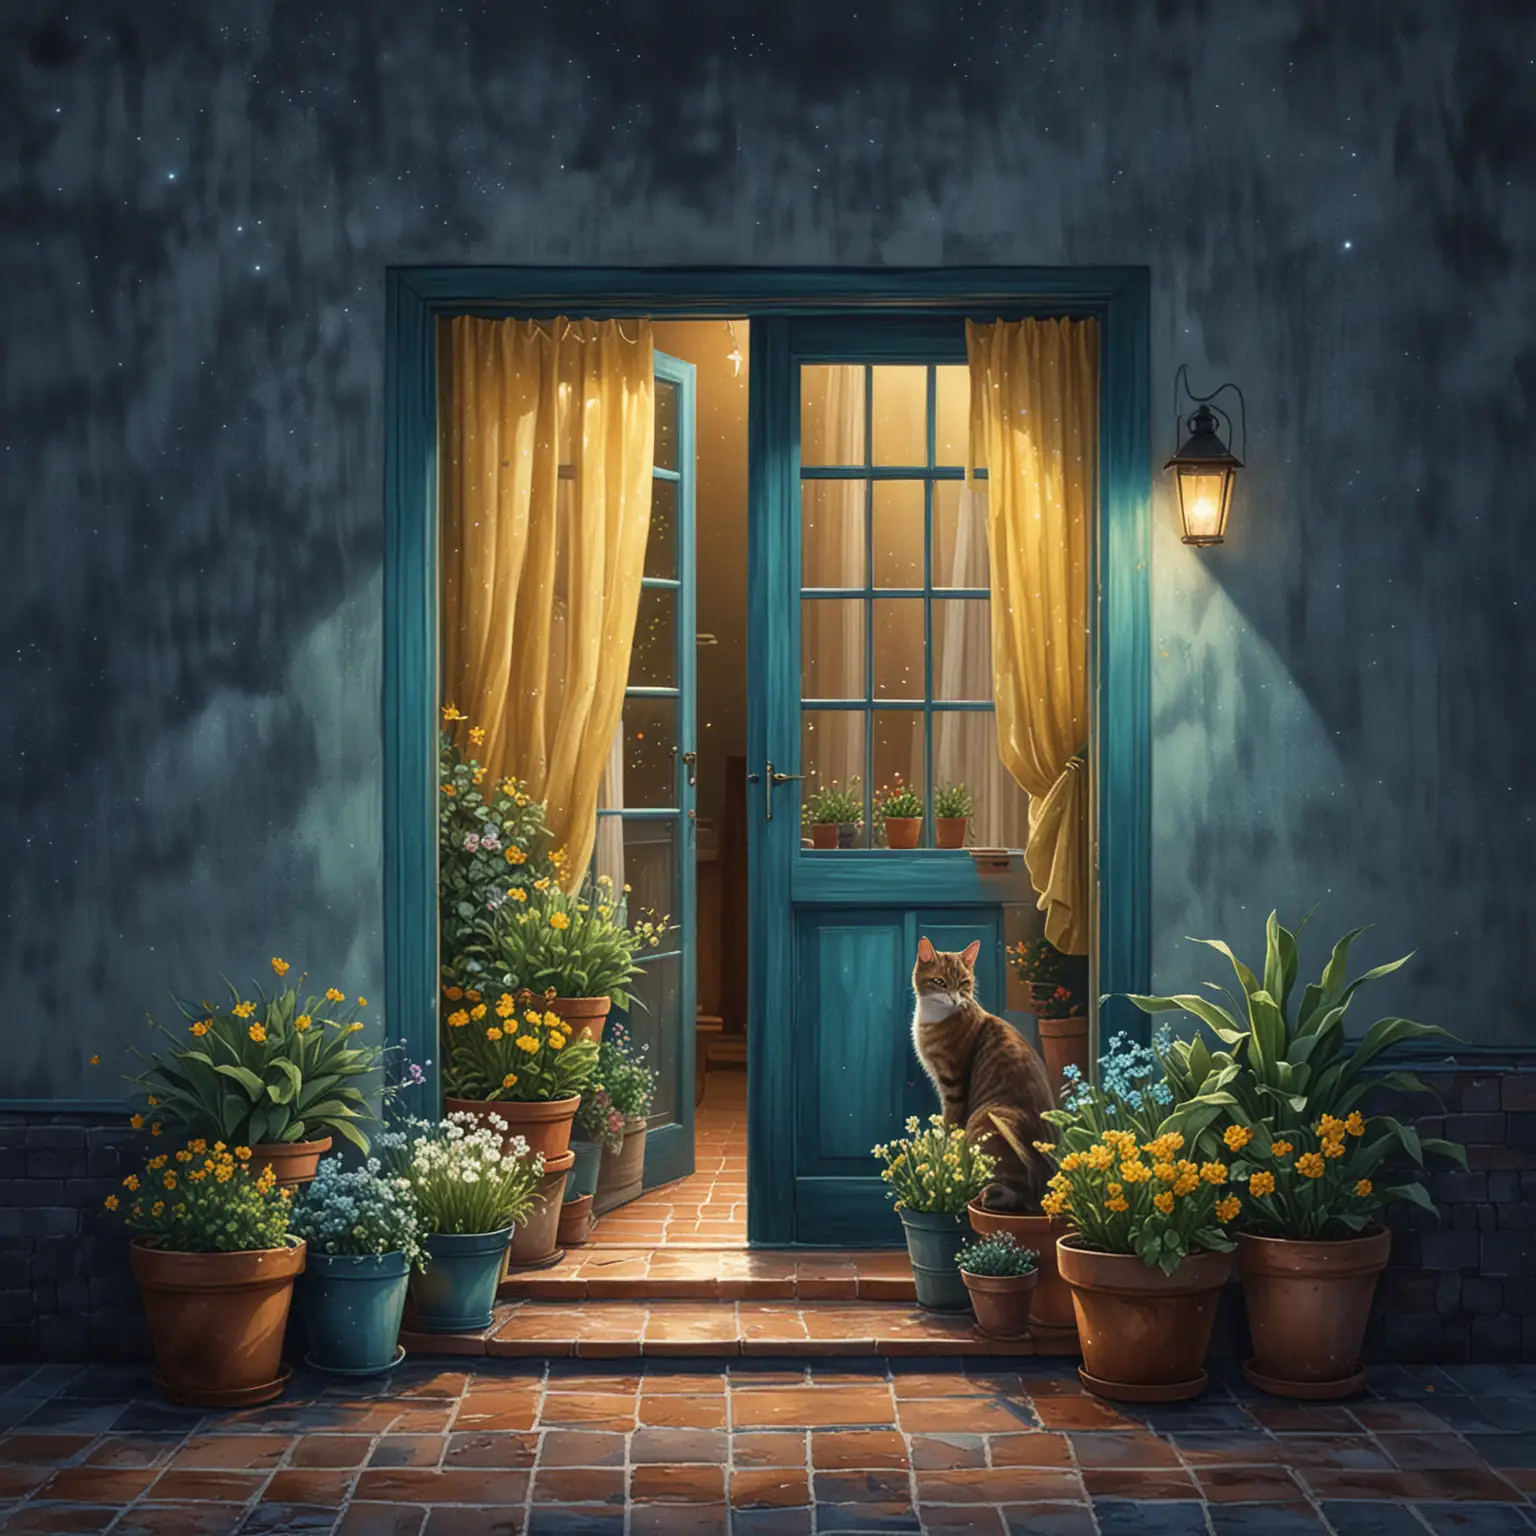 see from back a cat sitting by the opened door, pots of plants, pots of flowers, lantern hanging on the door, window with tile curtain, dark night sky with stars, palette colors of dark blue tosca, dark blue, green tosca,  gold yellow, 8k render, watercolor painting